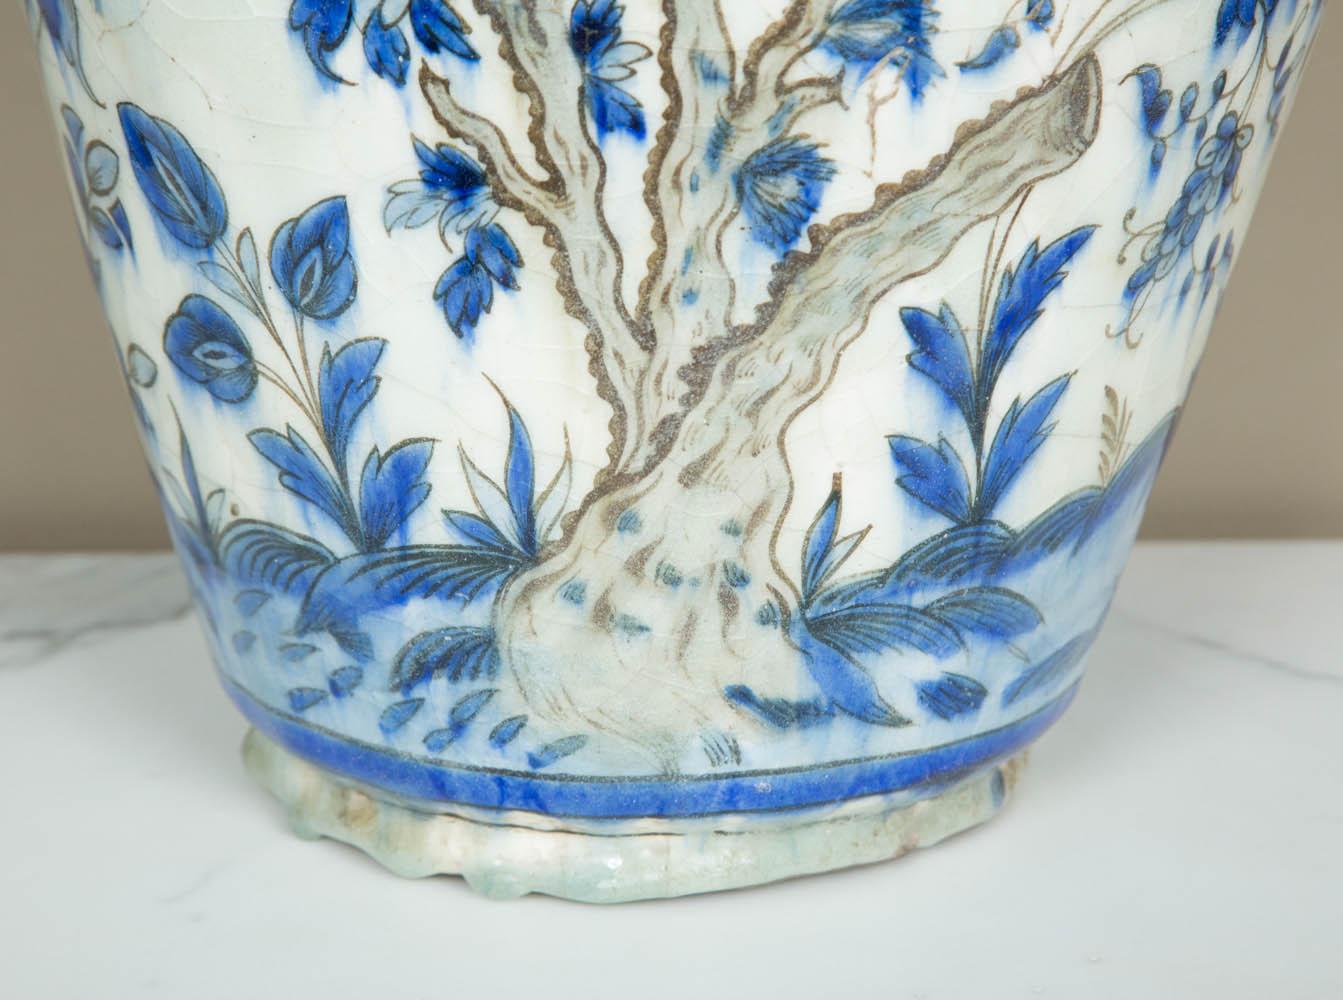 A Qajar (1794-1925) blue and white jar
Persia, 19th century, circa 1840-1960.
Underglaze blue painted fritware, on white ground with black outlines, depicting tree branches and scrolling flowers. Beautiful heavy drops of glaze at the bottom (see